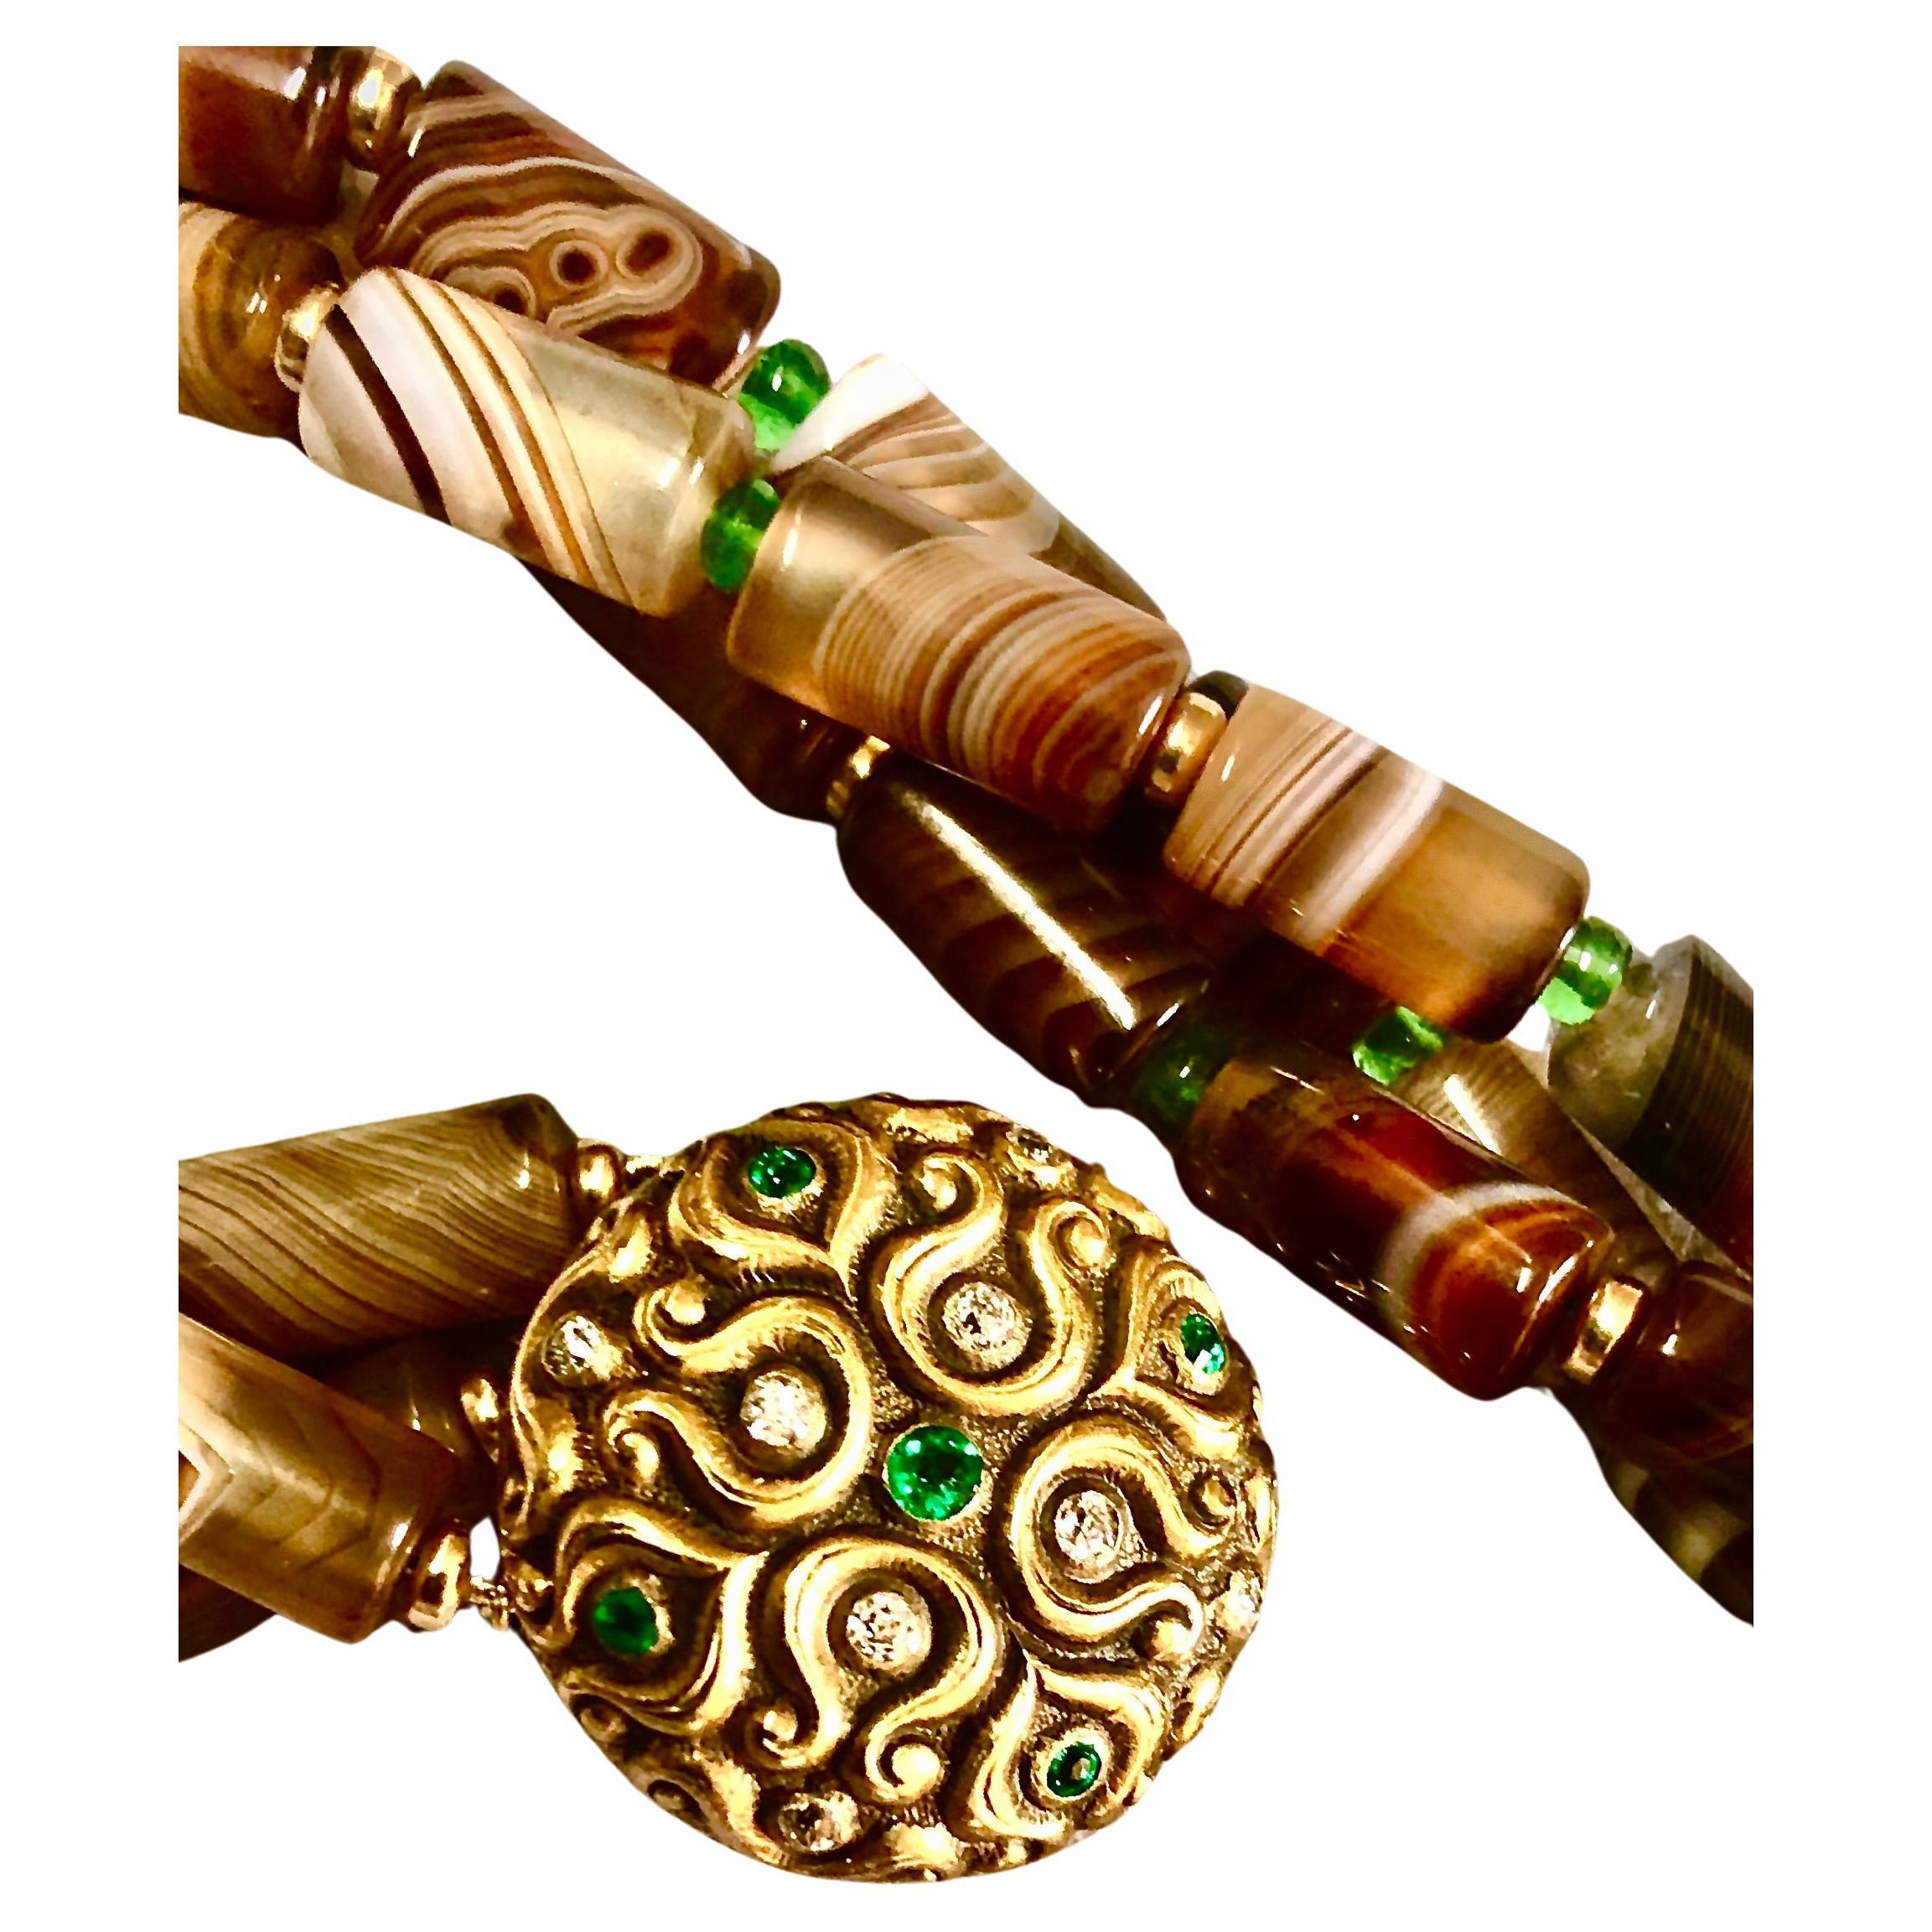 Handsome triple strand necklace of fascinating patterns of brown and caramel colored Botswana agate. The agate tubular beads are alternately place smooth rondelles of green tsavorite garnets and 14kt polished gold.

The focus of the beads is a